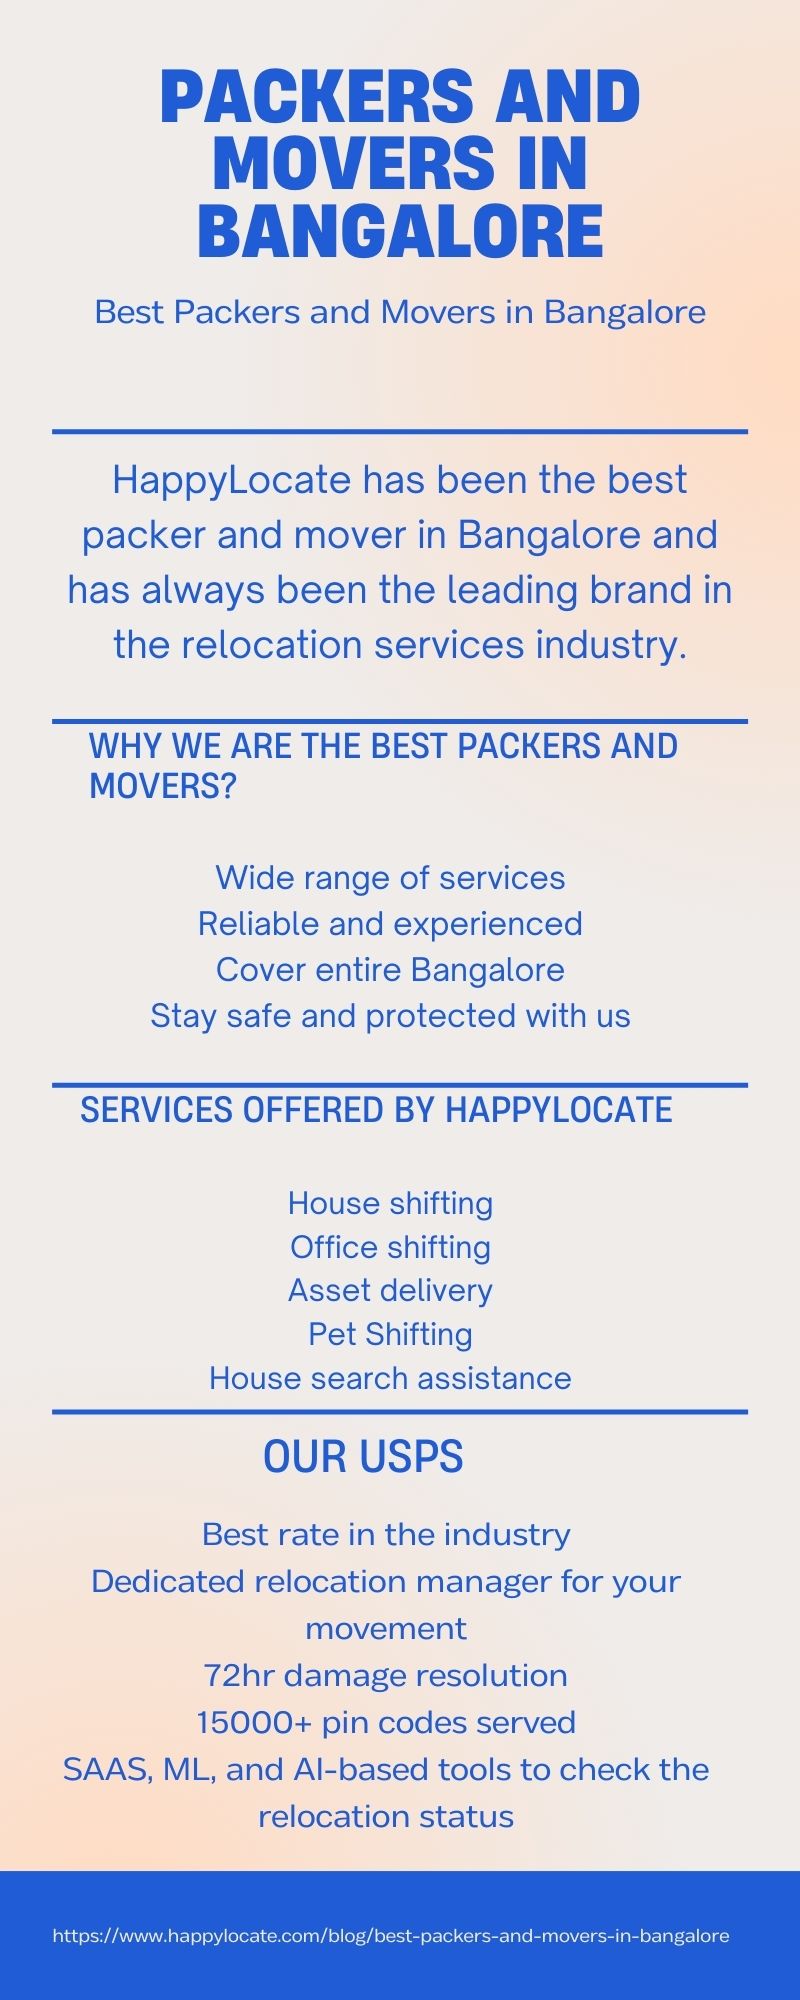 PACKERS AND
MOVERS IN
BANGALORE

Best Packers and Movers in Bangalore

HappylLocate has been the best
packer and mover in Bangalore and
has always been the leading brand in
the relocation services industry.

WHY WE ARE THE BEST PACKERS AND
MOVERS?

Wide range of services
Reliable and experienced
Cover entire Bangalore
Stay safe and protected with us

SERVICES OFFERED BY HAPPYLOCATE

House shifting
Office shifting
Asset delivery
Pet Shifting
House search assistance

OUR USPS

Best rate in the industry
Dedicated relocation manager for your
movement
72hr damage resolution
15000+ pin codes served
SAAS, ML, and Al-based tools to check the
relocation status

RTT) g/best-packers-and-movers.